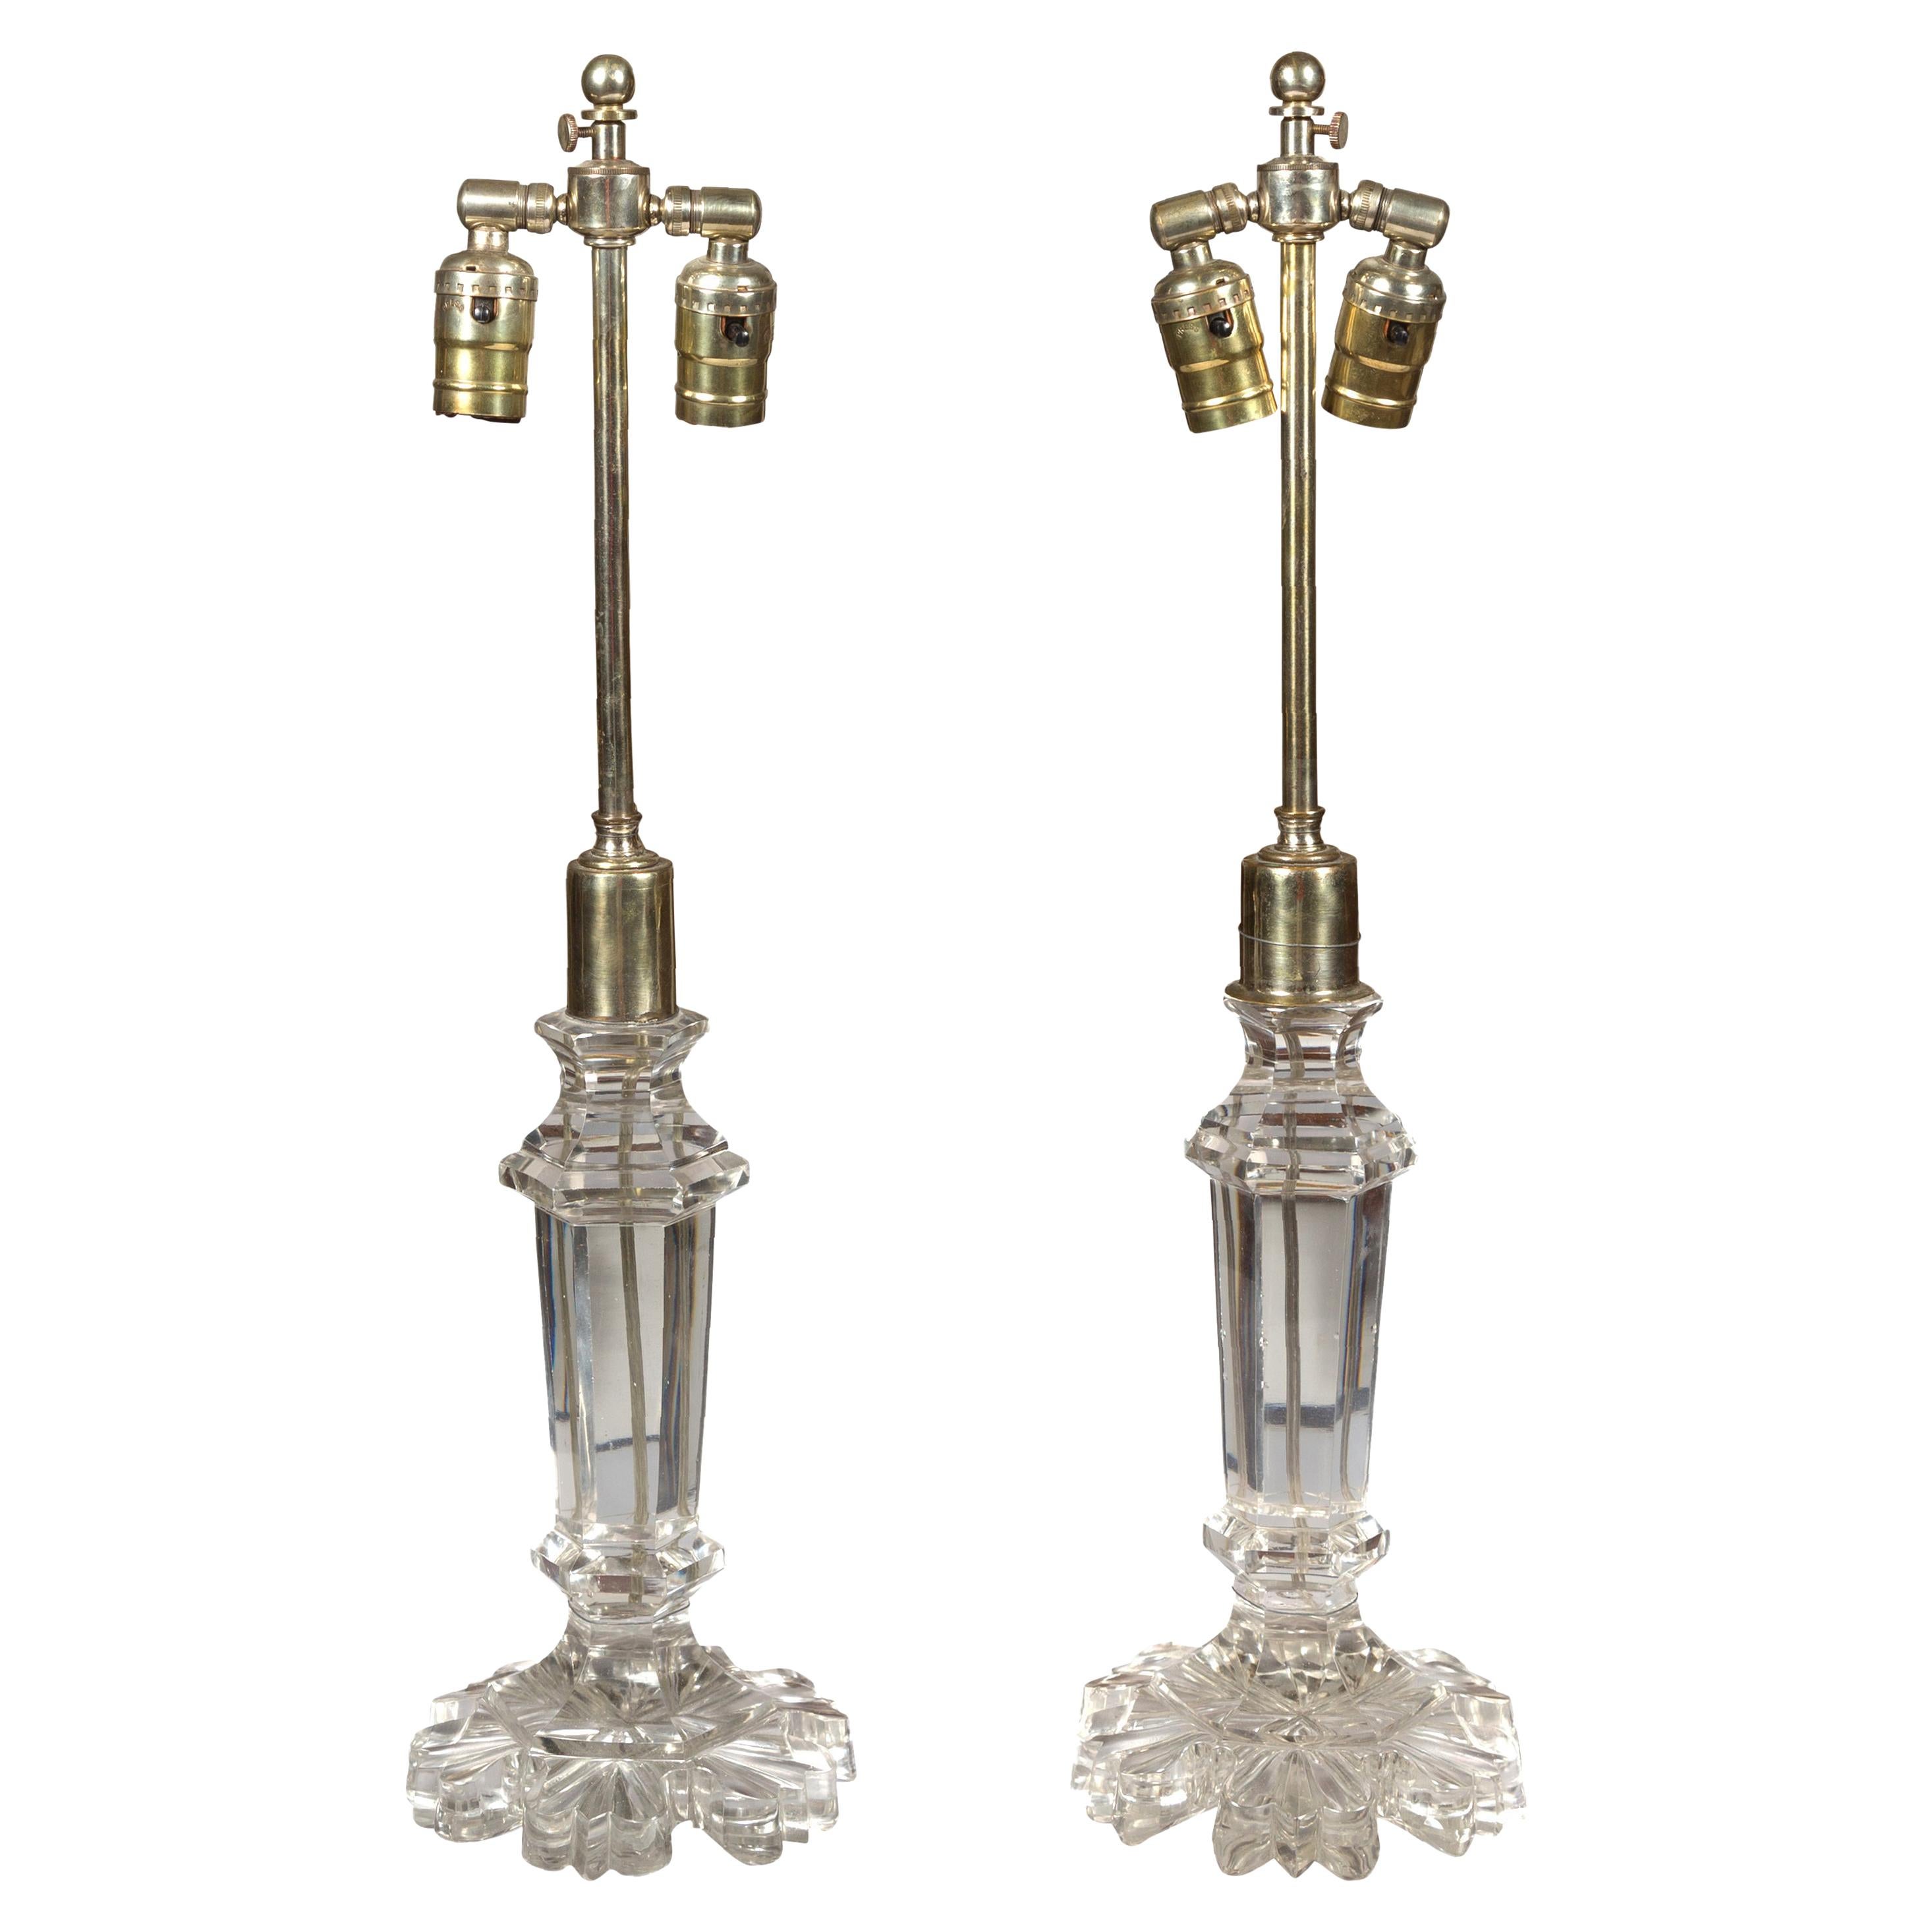 Pair of Irish Crystal 1850s Two-Light Table Lamps with Floral Shaped Bases For Sale